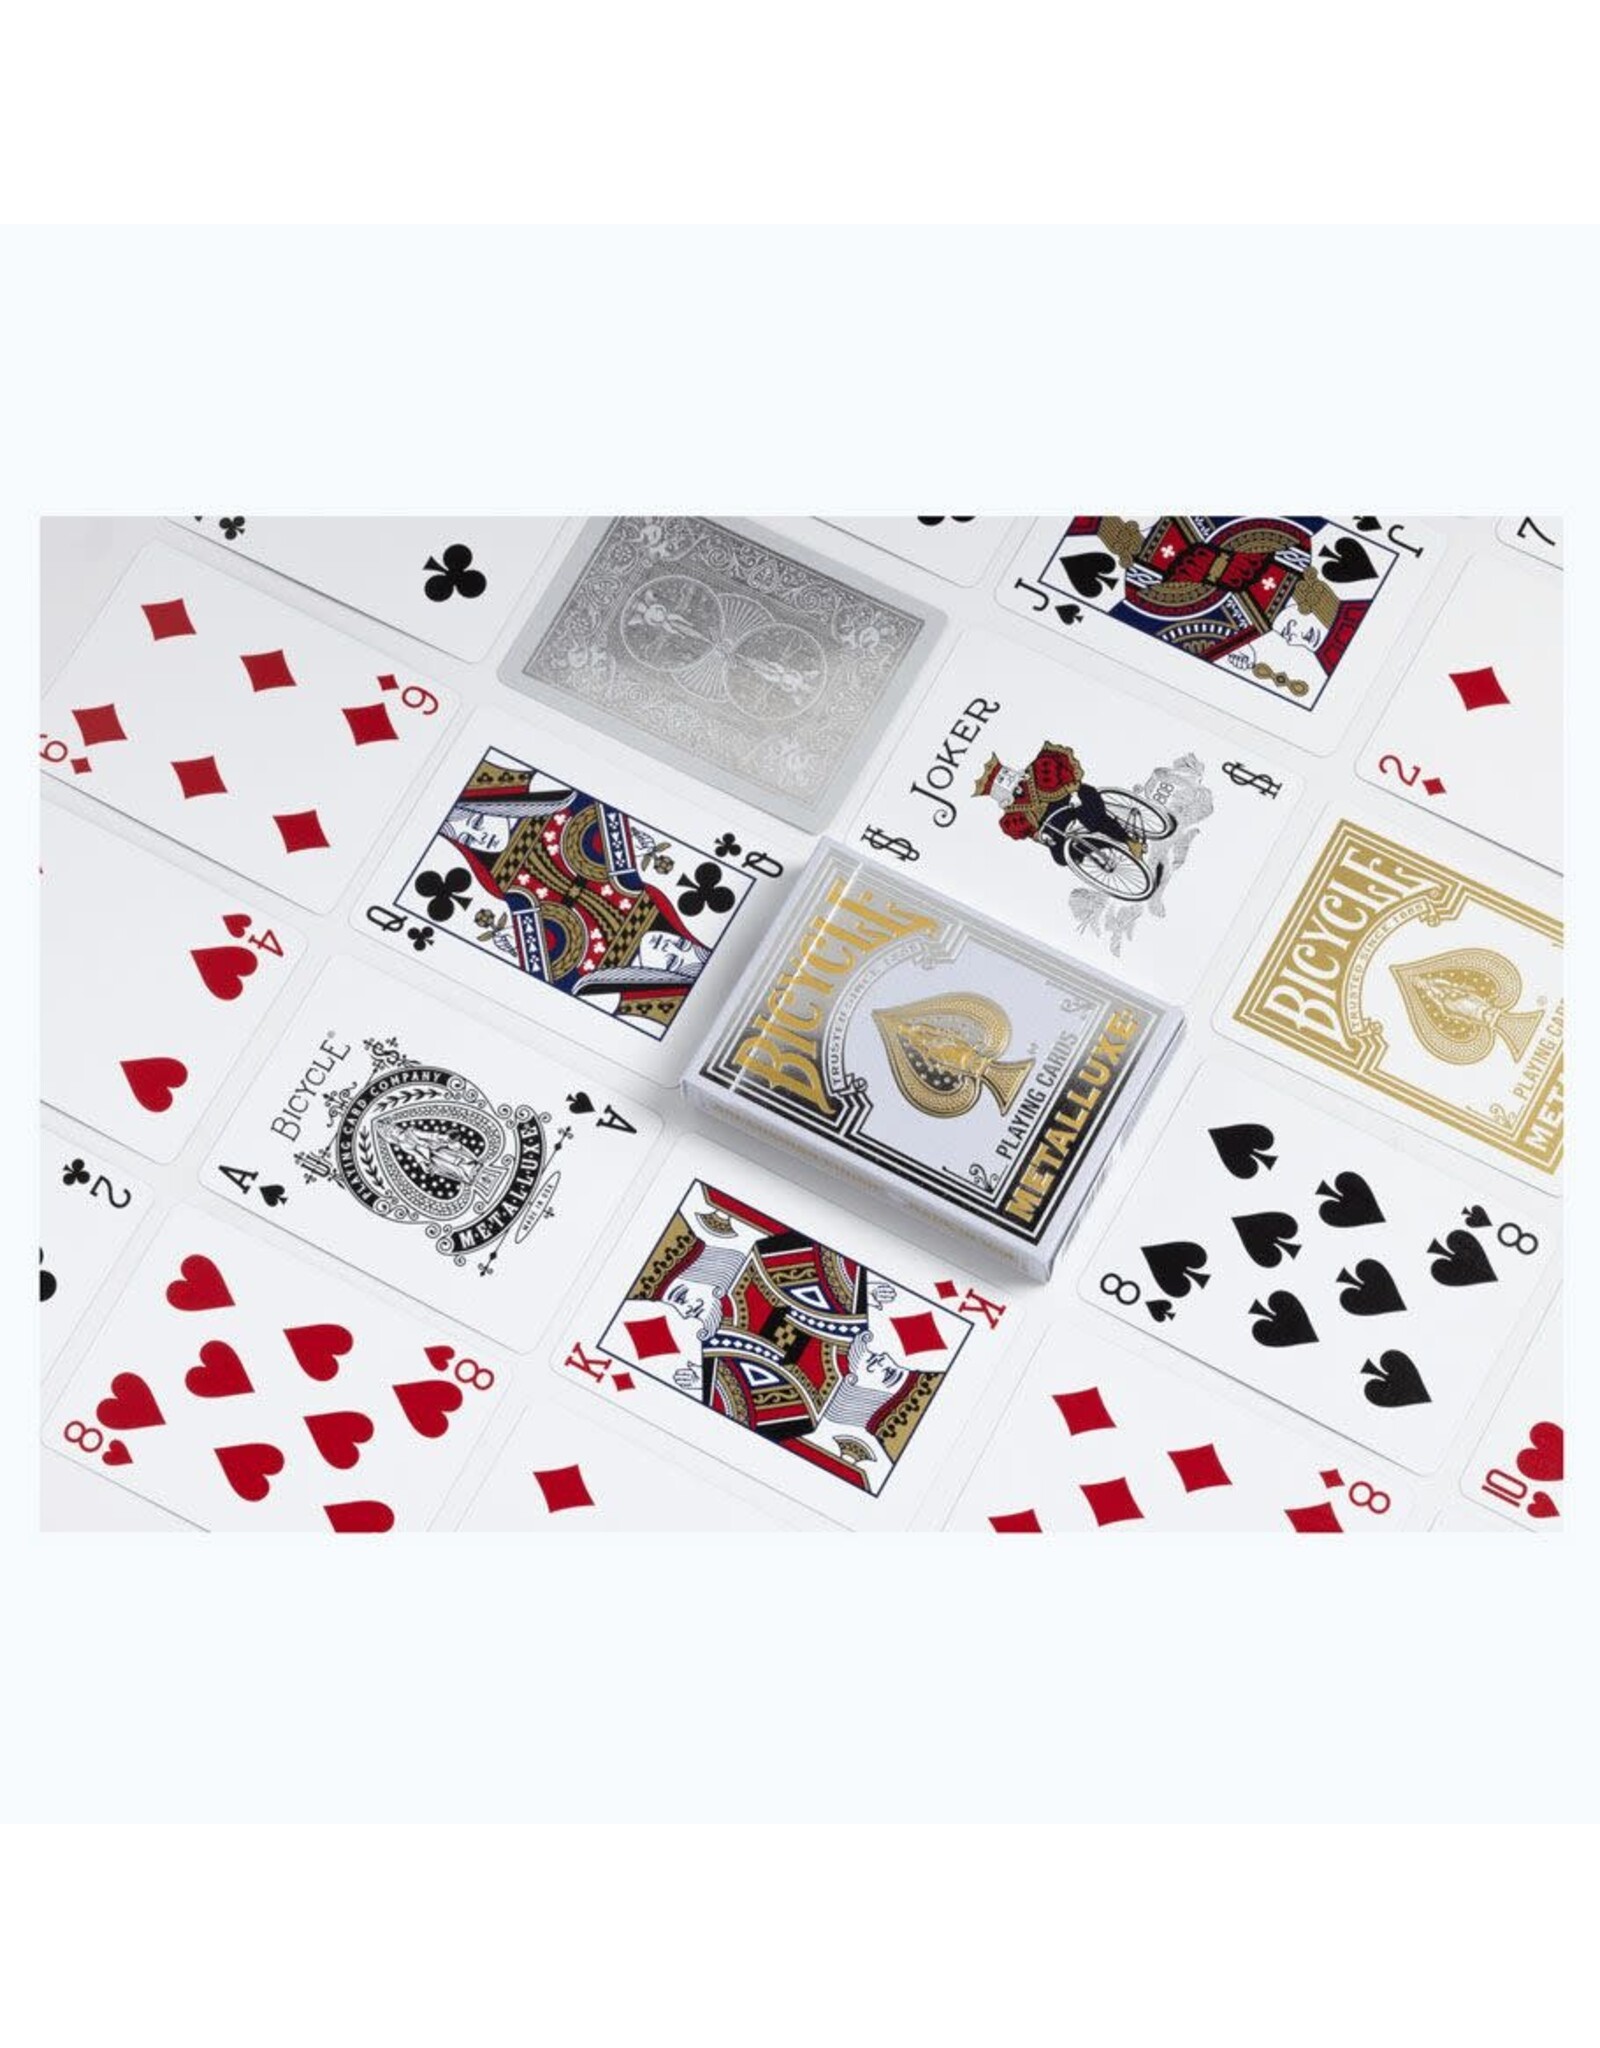 Bicycle Playing Cards: Metalluxe Silver